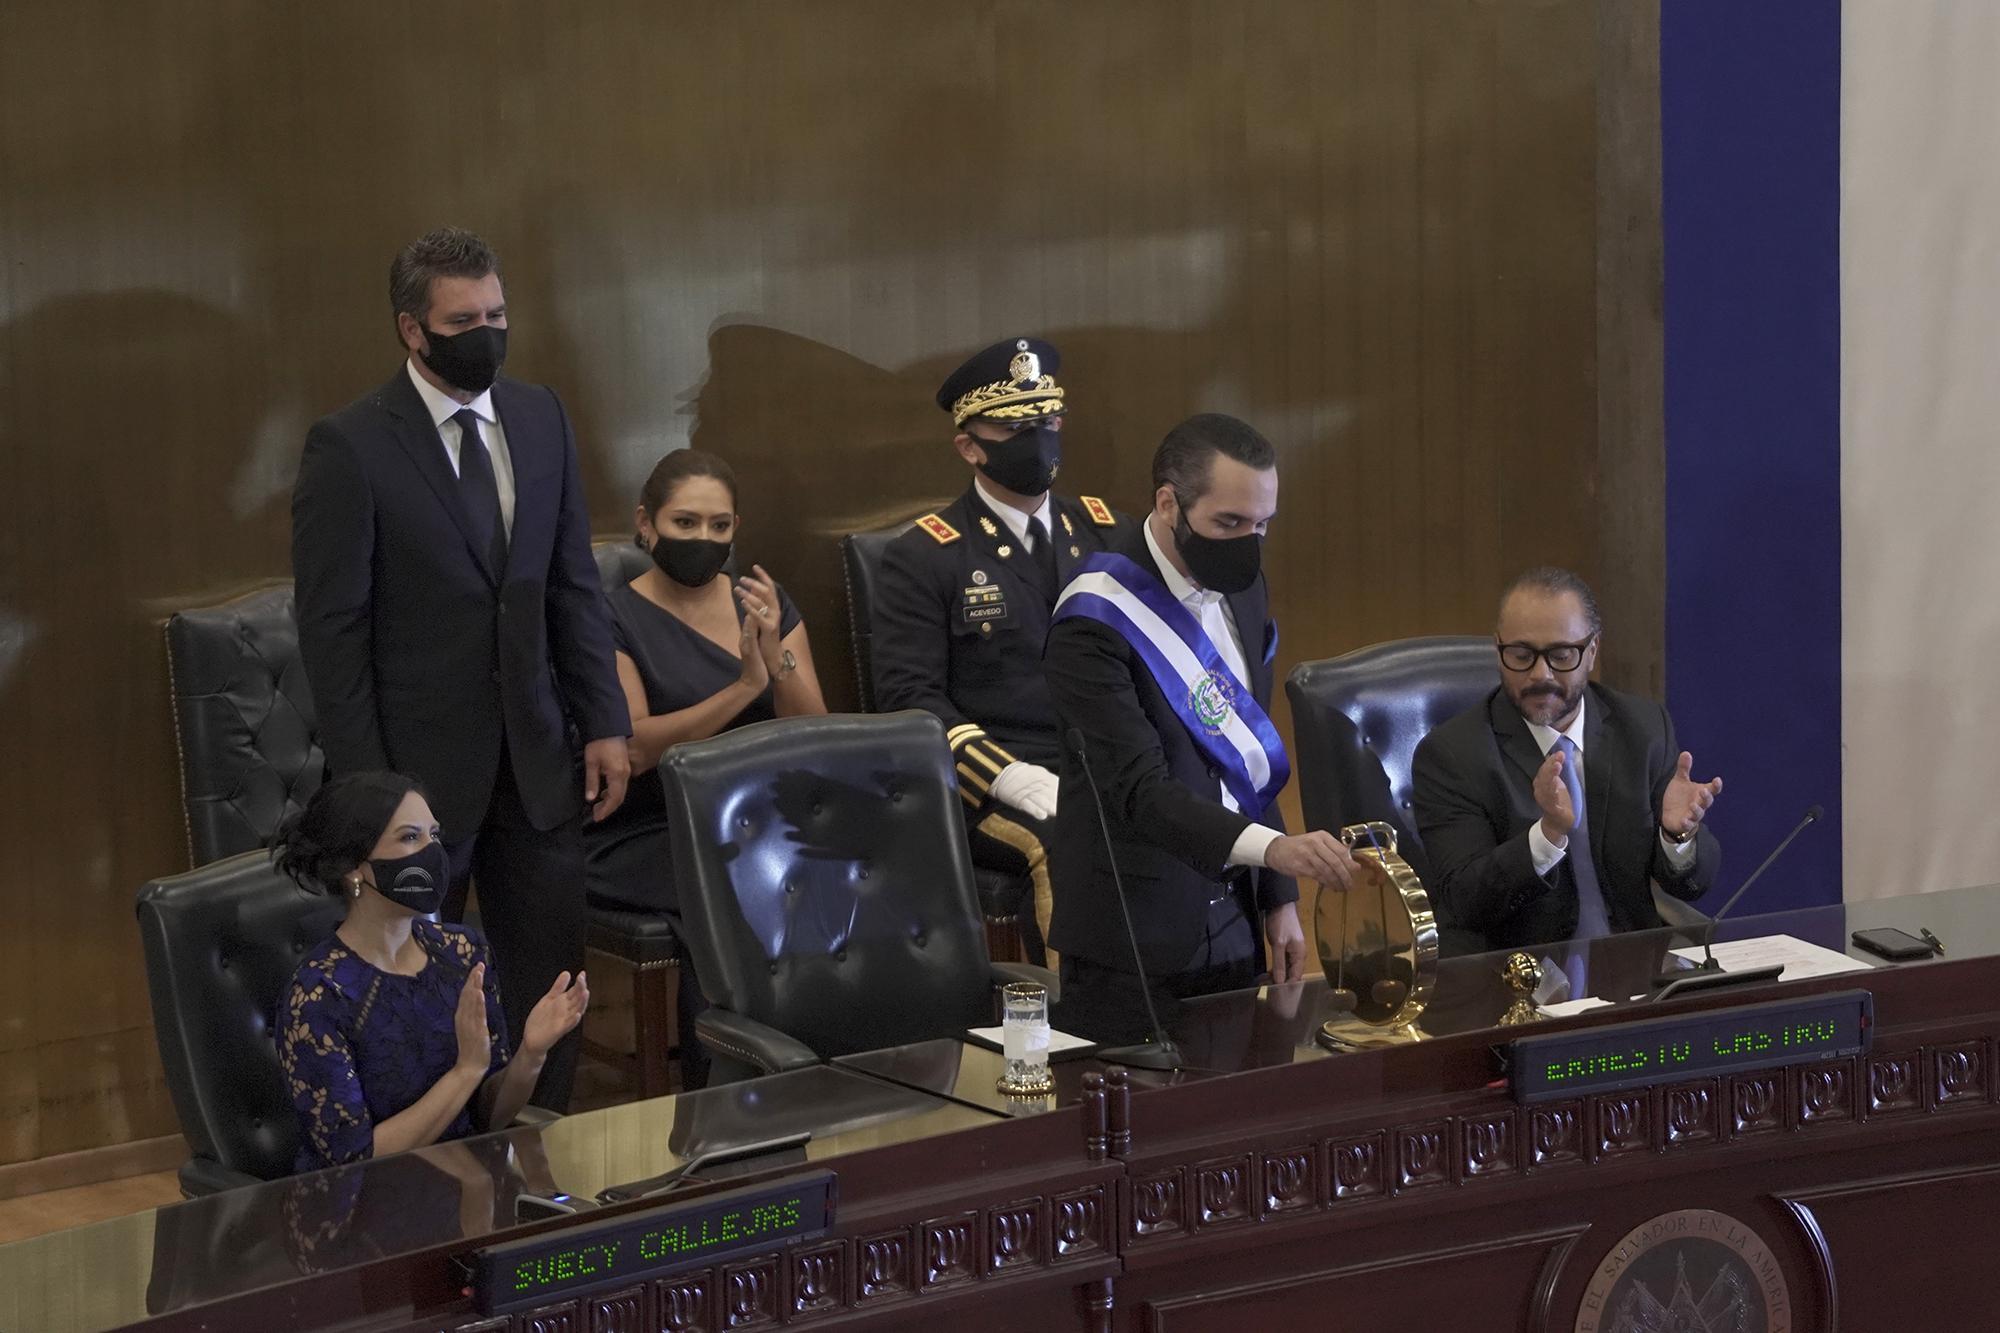 President Nayib Bukele, at the request of the president of the Legislative Assembly, rings the gong to begin an “extraordinary plenary session on accountability” during his second year in office. Photo by Víctor Peña / El Faro.